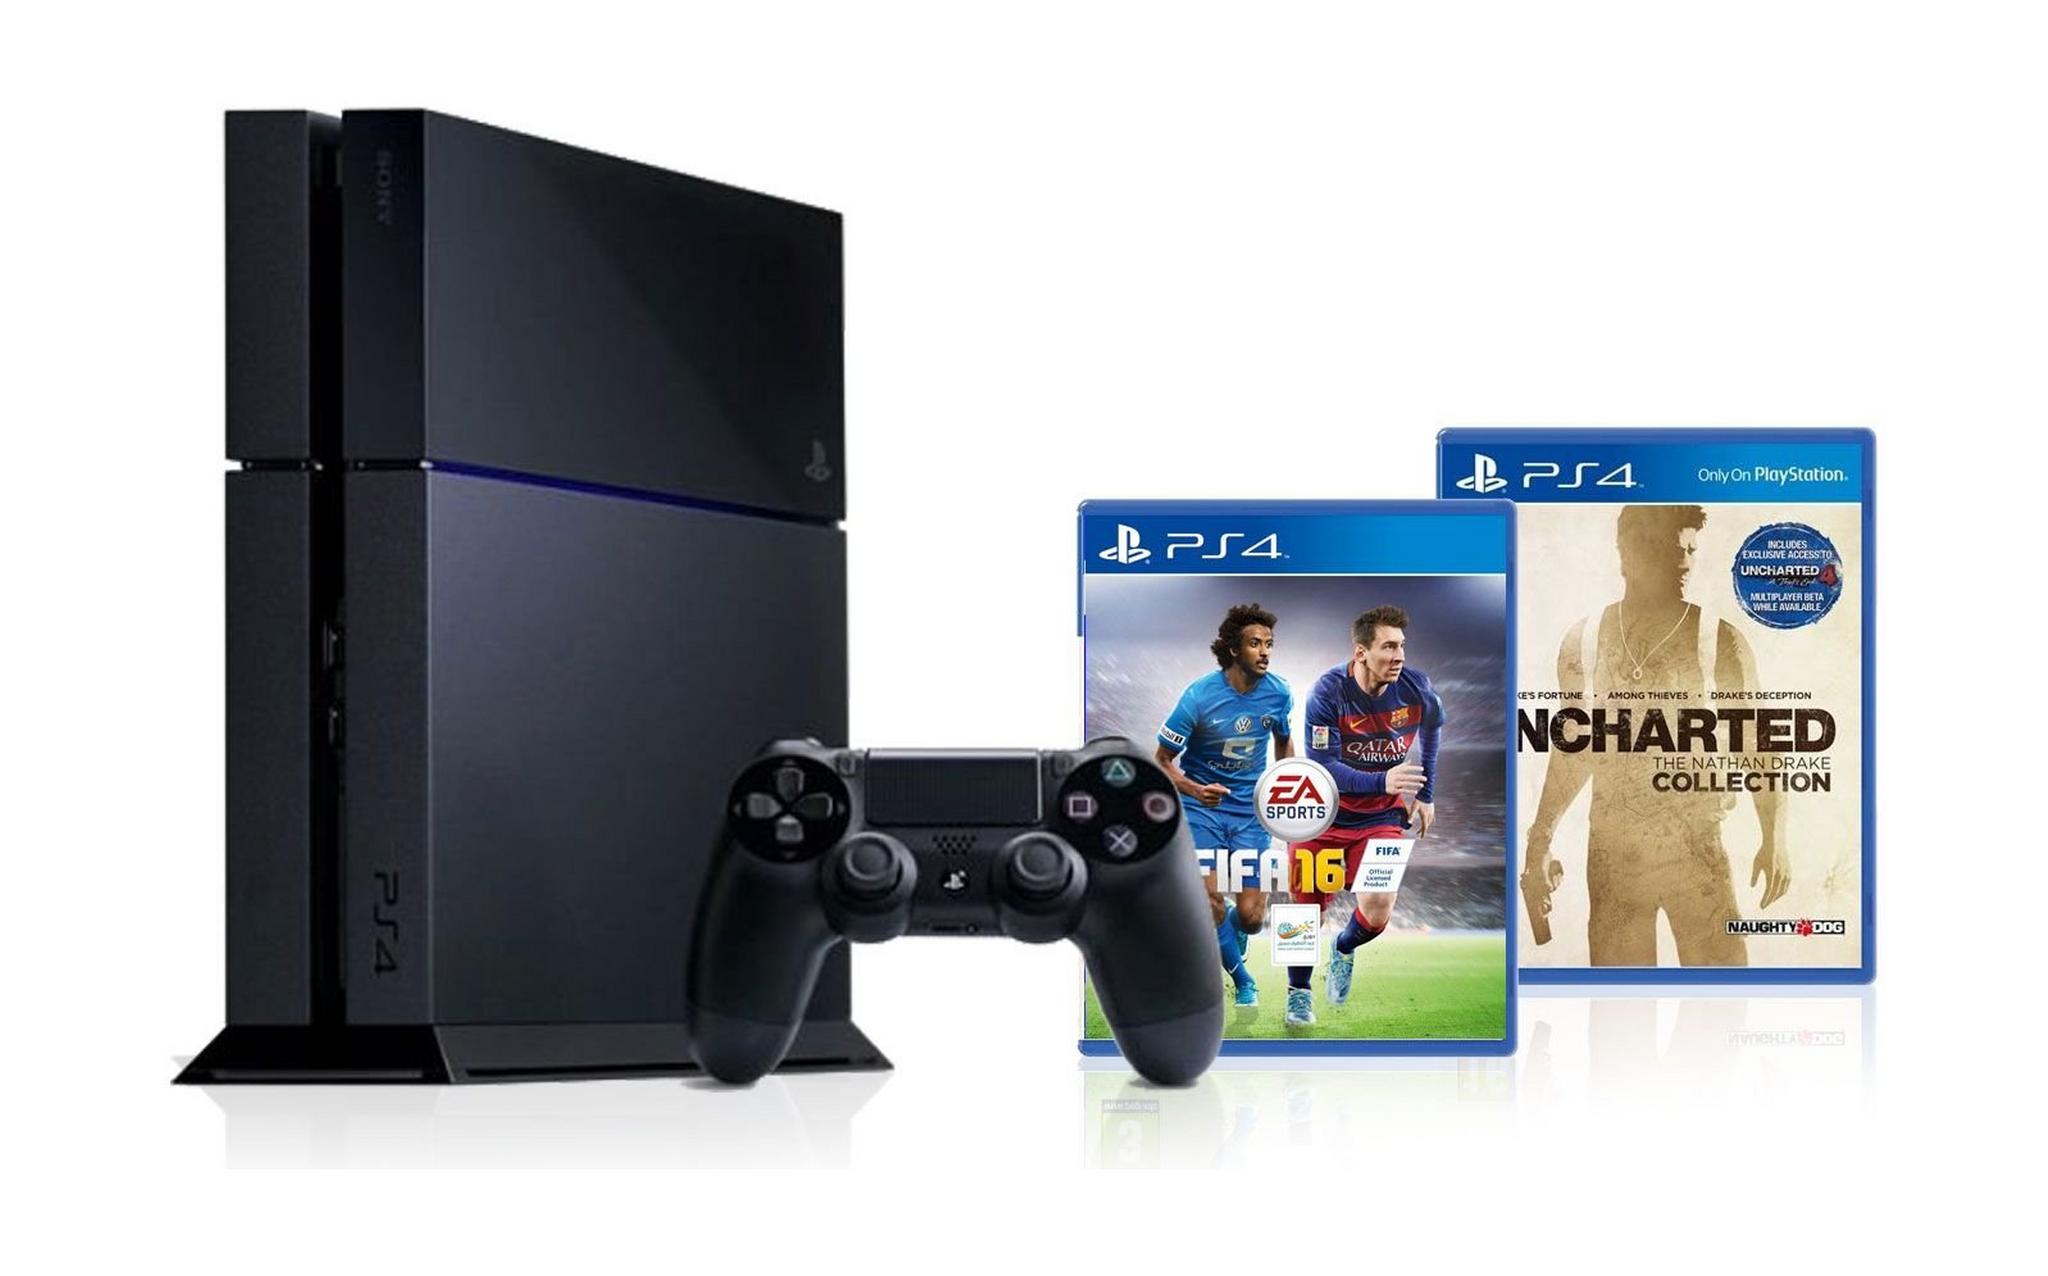 PlayStation4 1TB Gaming Console + Uncharted: The Nathan Drake Collection + Fifa 16 (with Arabic Commentary) - PS4 Games